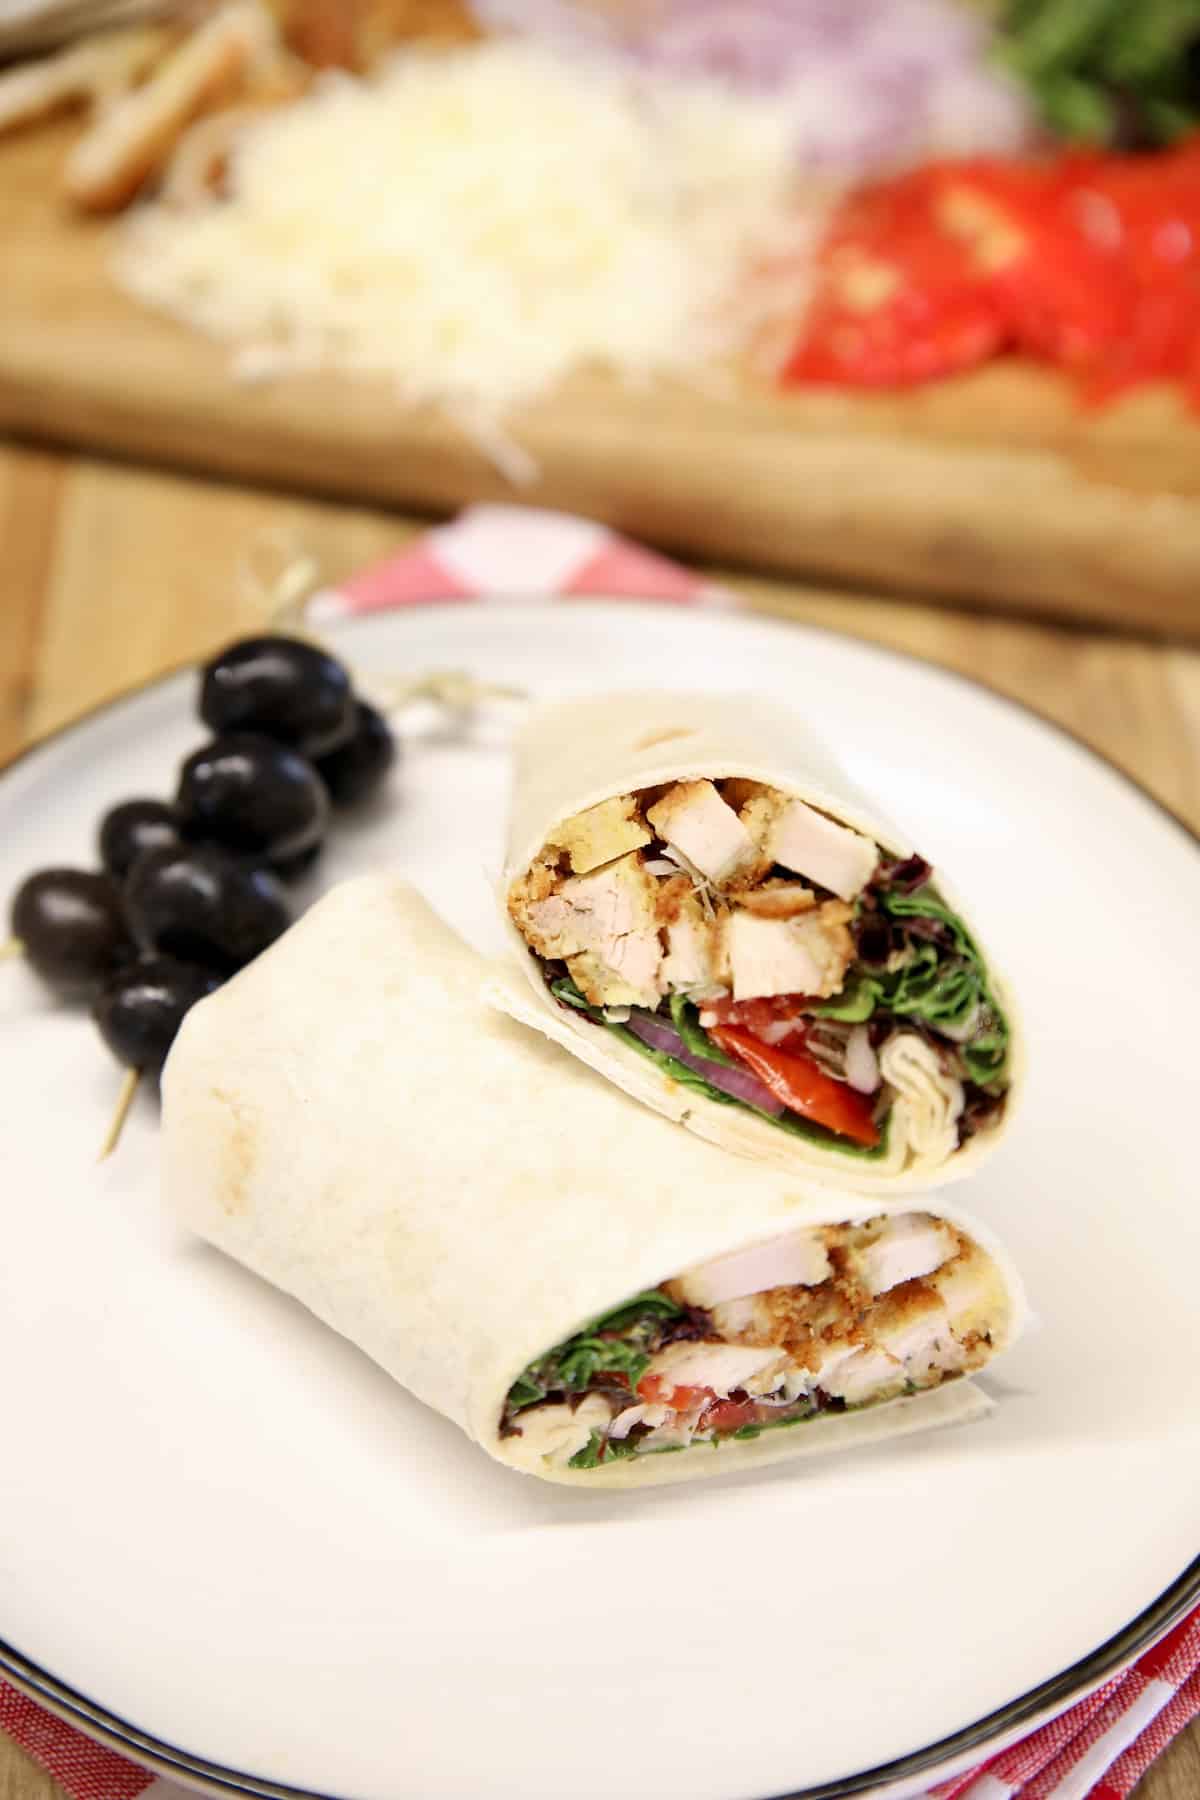 Chicken parmesan wrap cut in half on a plate with olives.